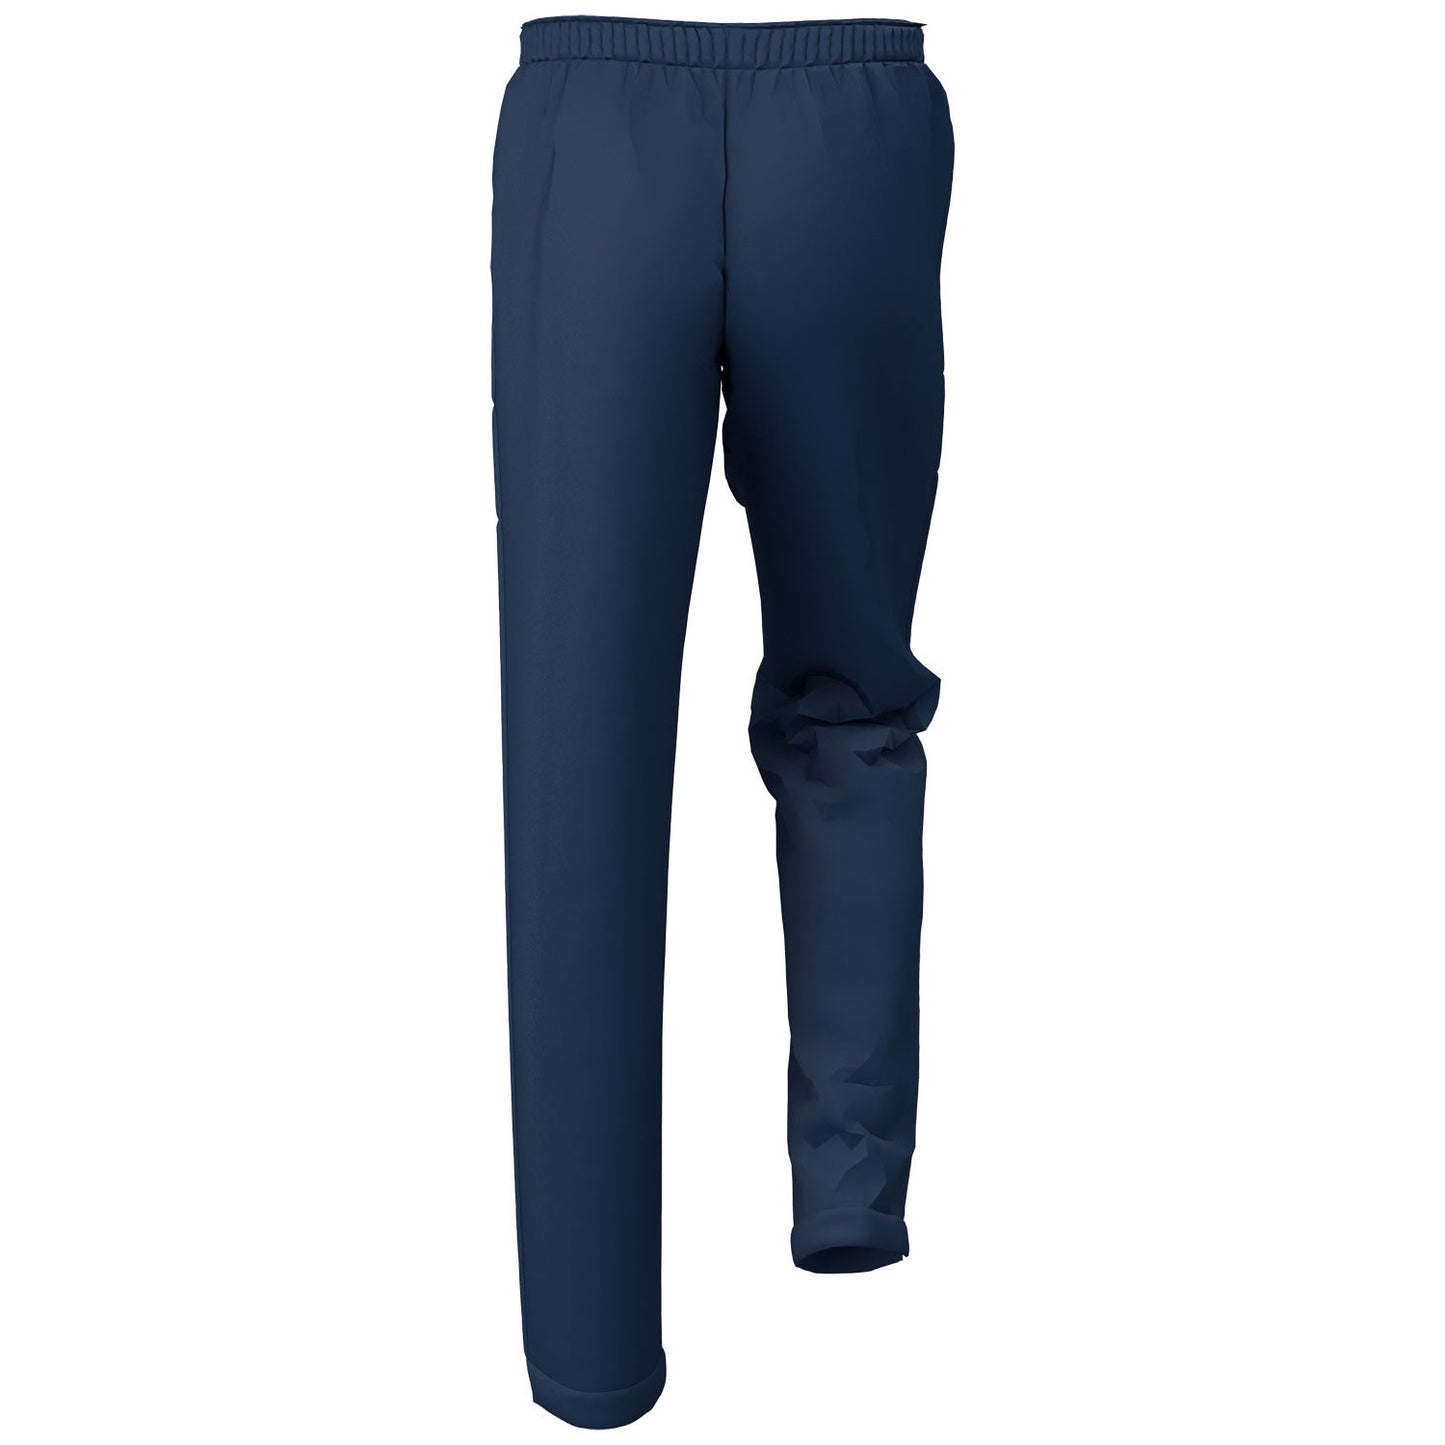 St Anne's College Oxford Tracksuit Bottoms